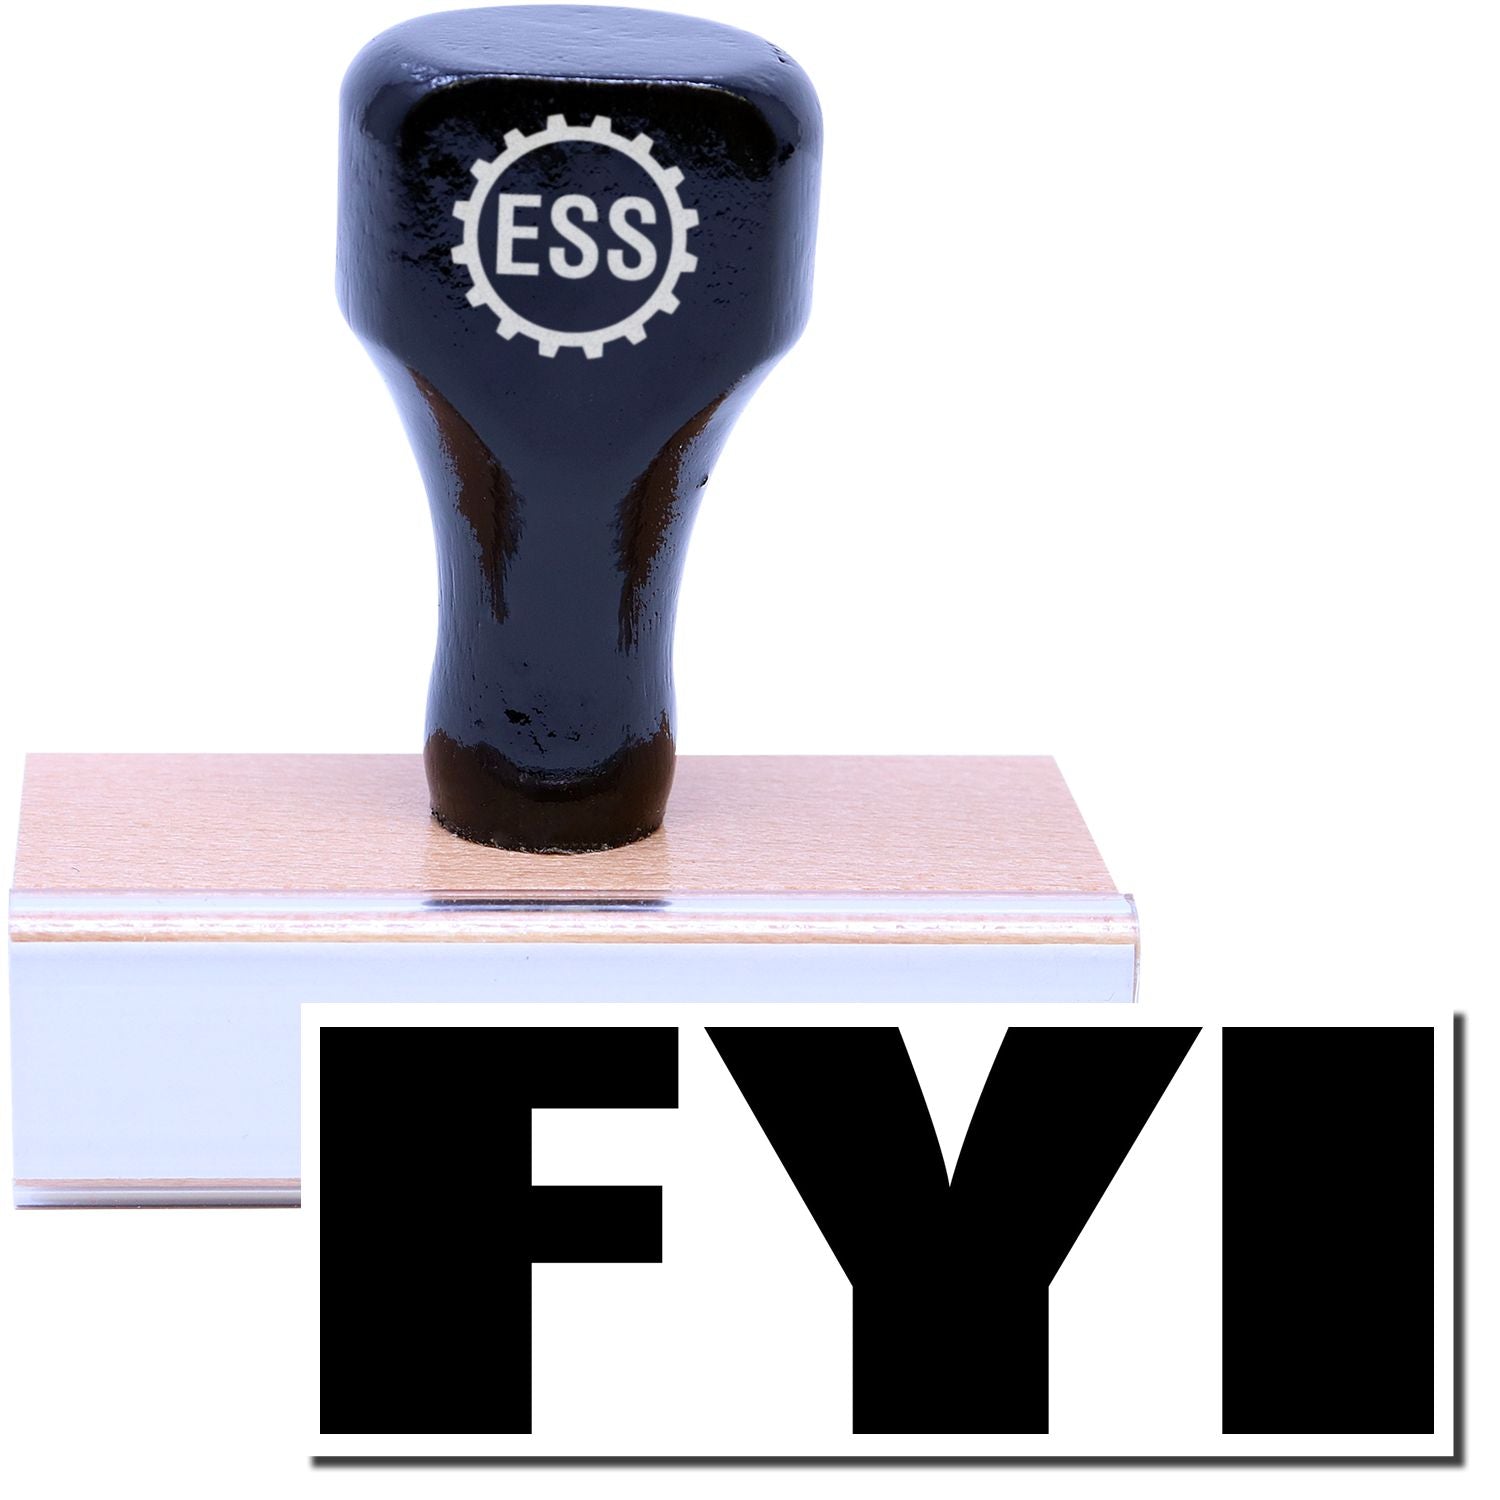 A stock office rubber stamp with a stamped image showing how the text "FYI" in bold font is displayed after stamping.